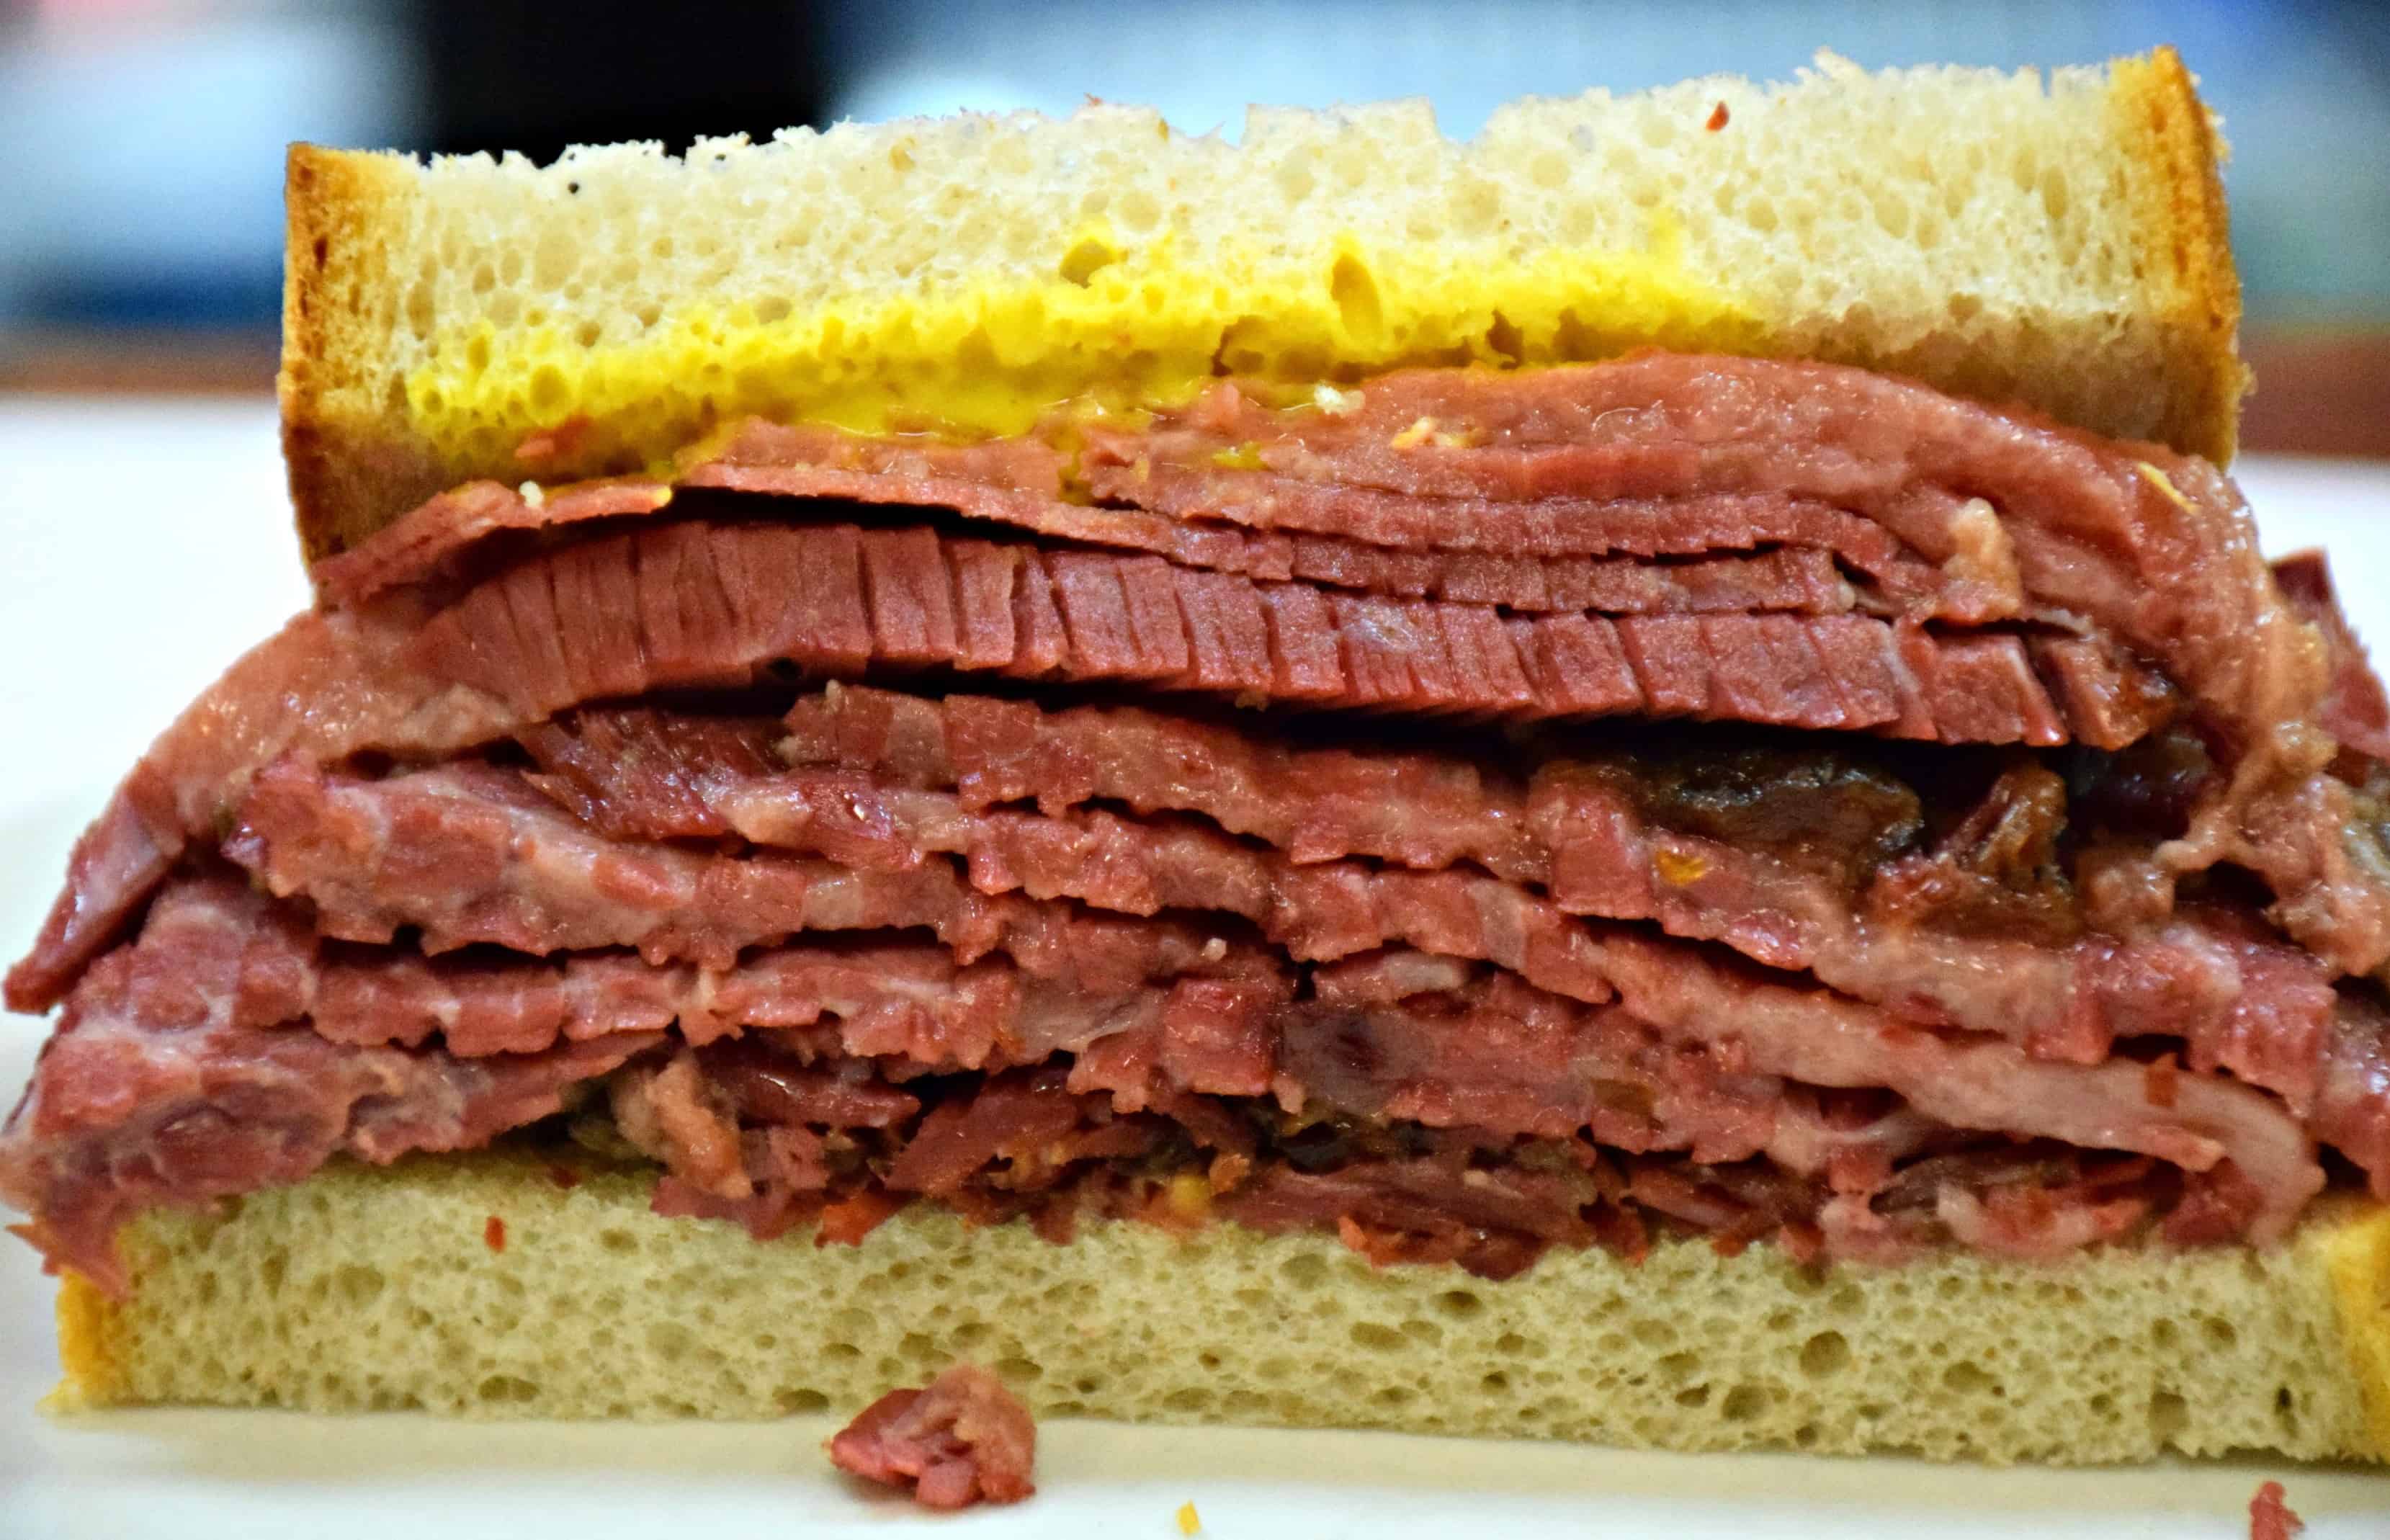 Montreal Smoked meat sandwich